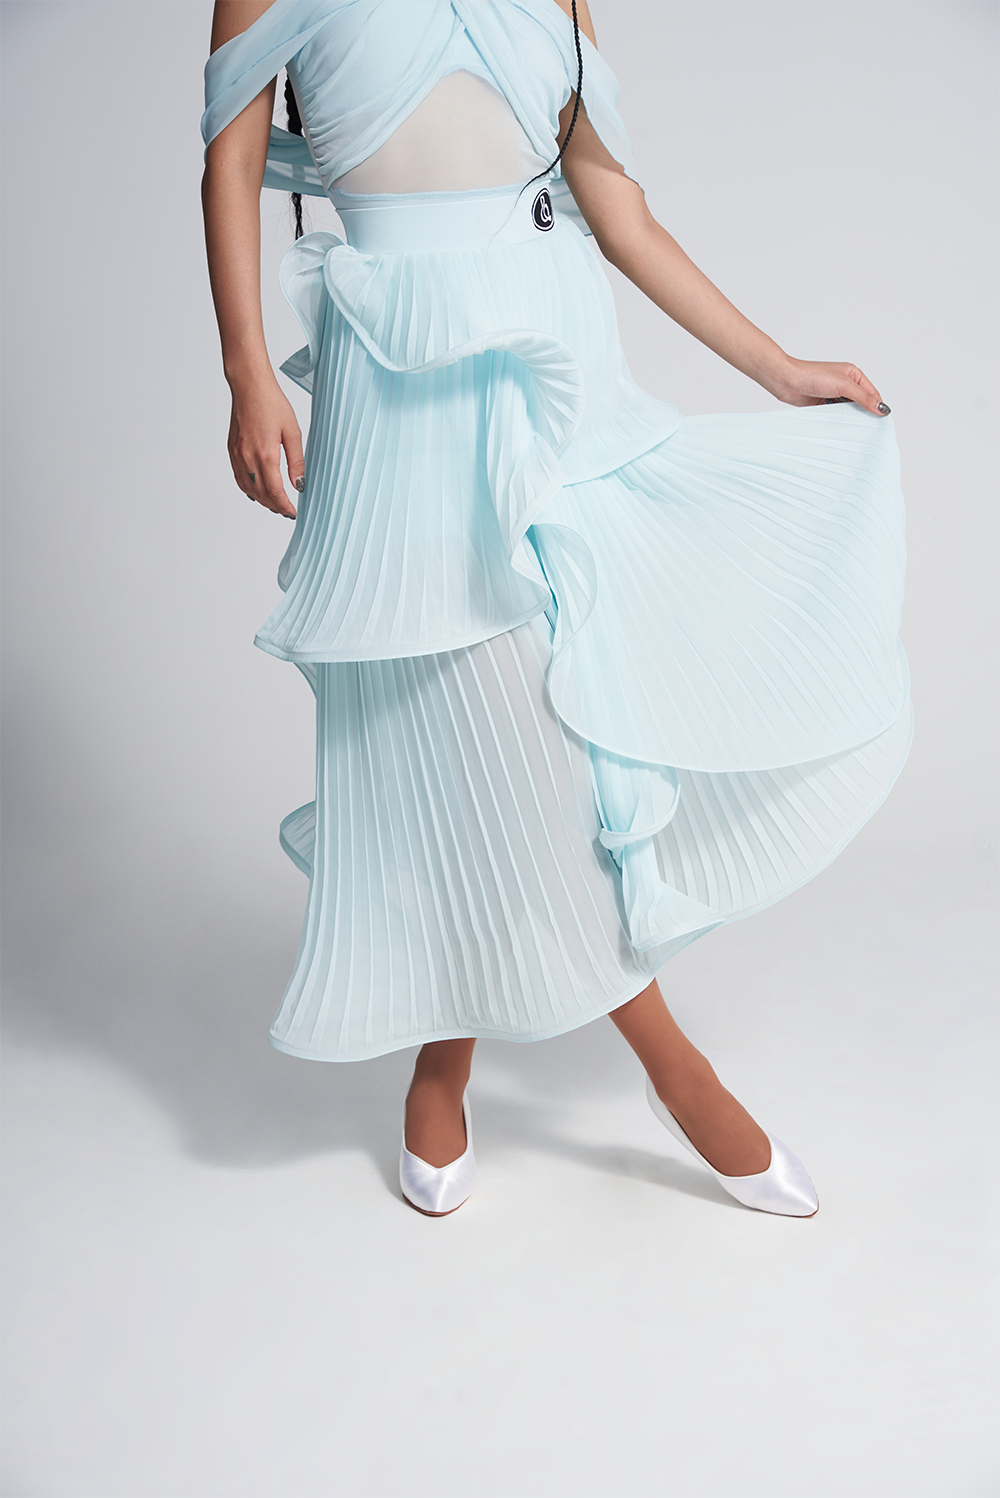 Enhance your performance with the DANCE QUEEN 493-2 Glacier Blue Pleated Ruffle Ballroom Skirt. This elegant and flowy skirt features pleated ruffles that create beautiful movement while dancing, helping you stand out on the dance floor. Made with quality fabric and precise stitching for a comfortable and professional fit.